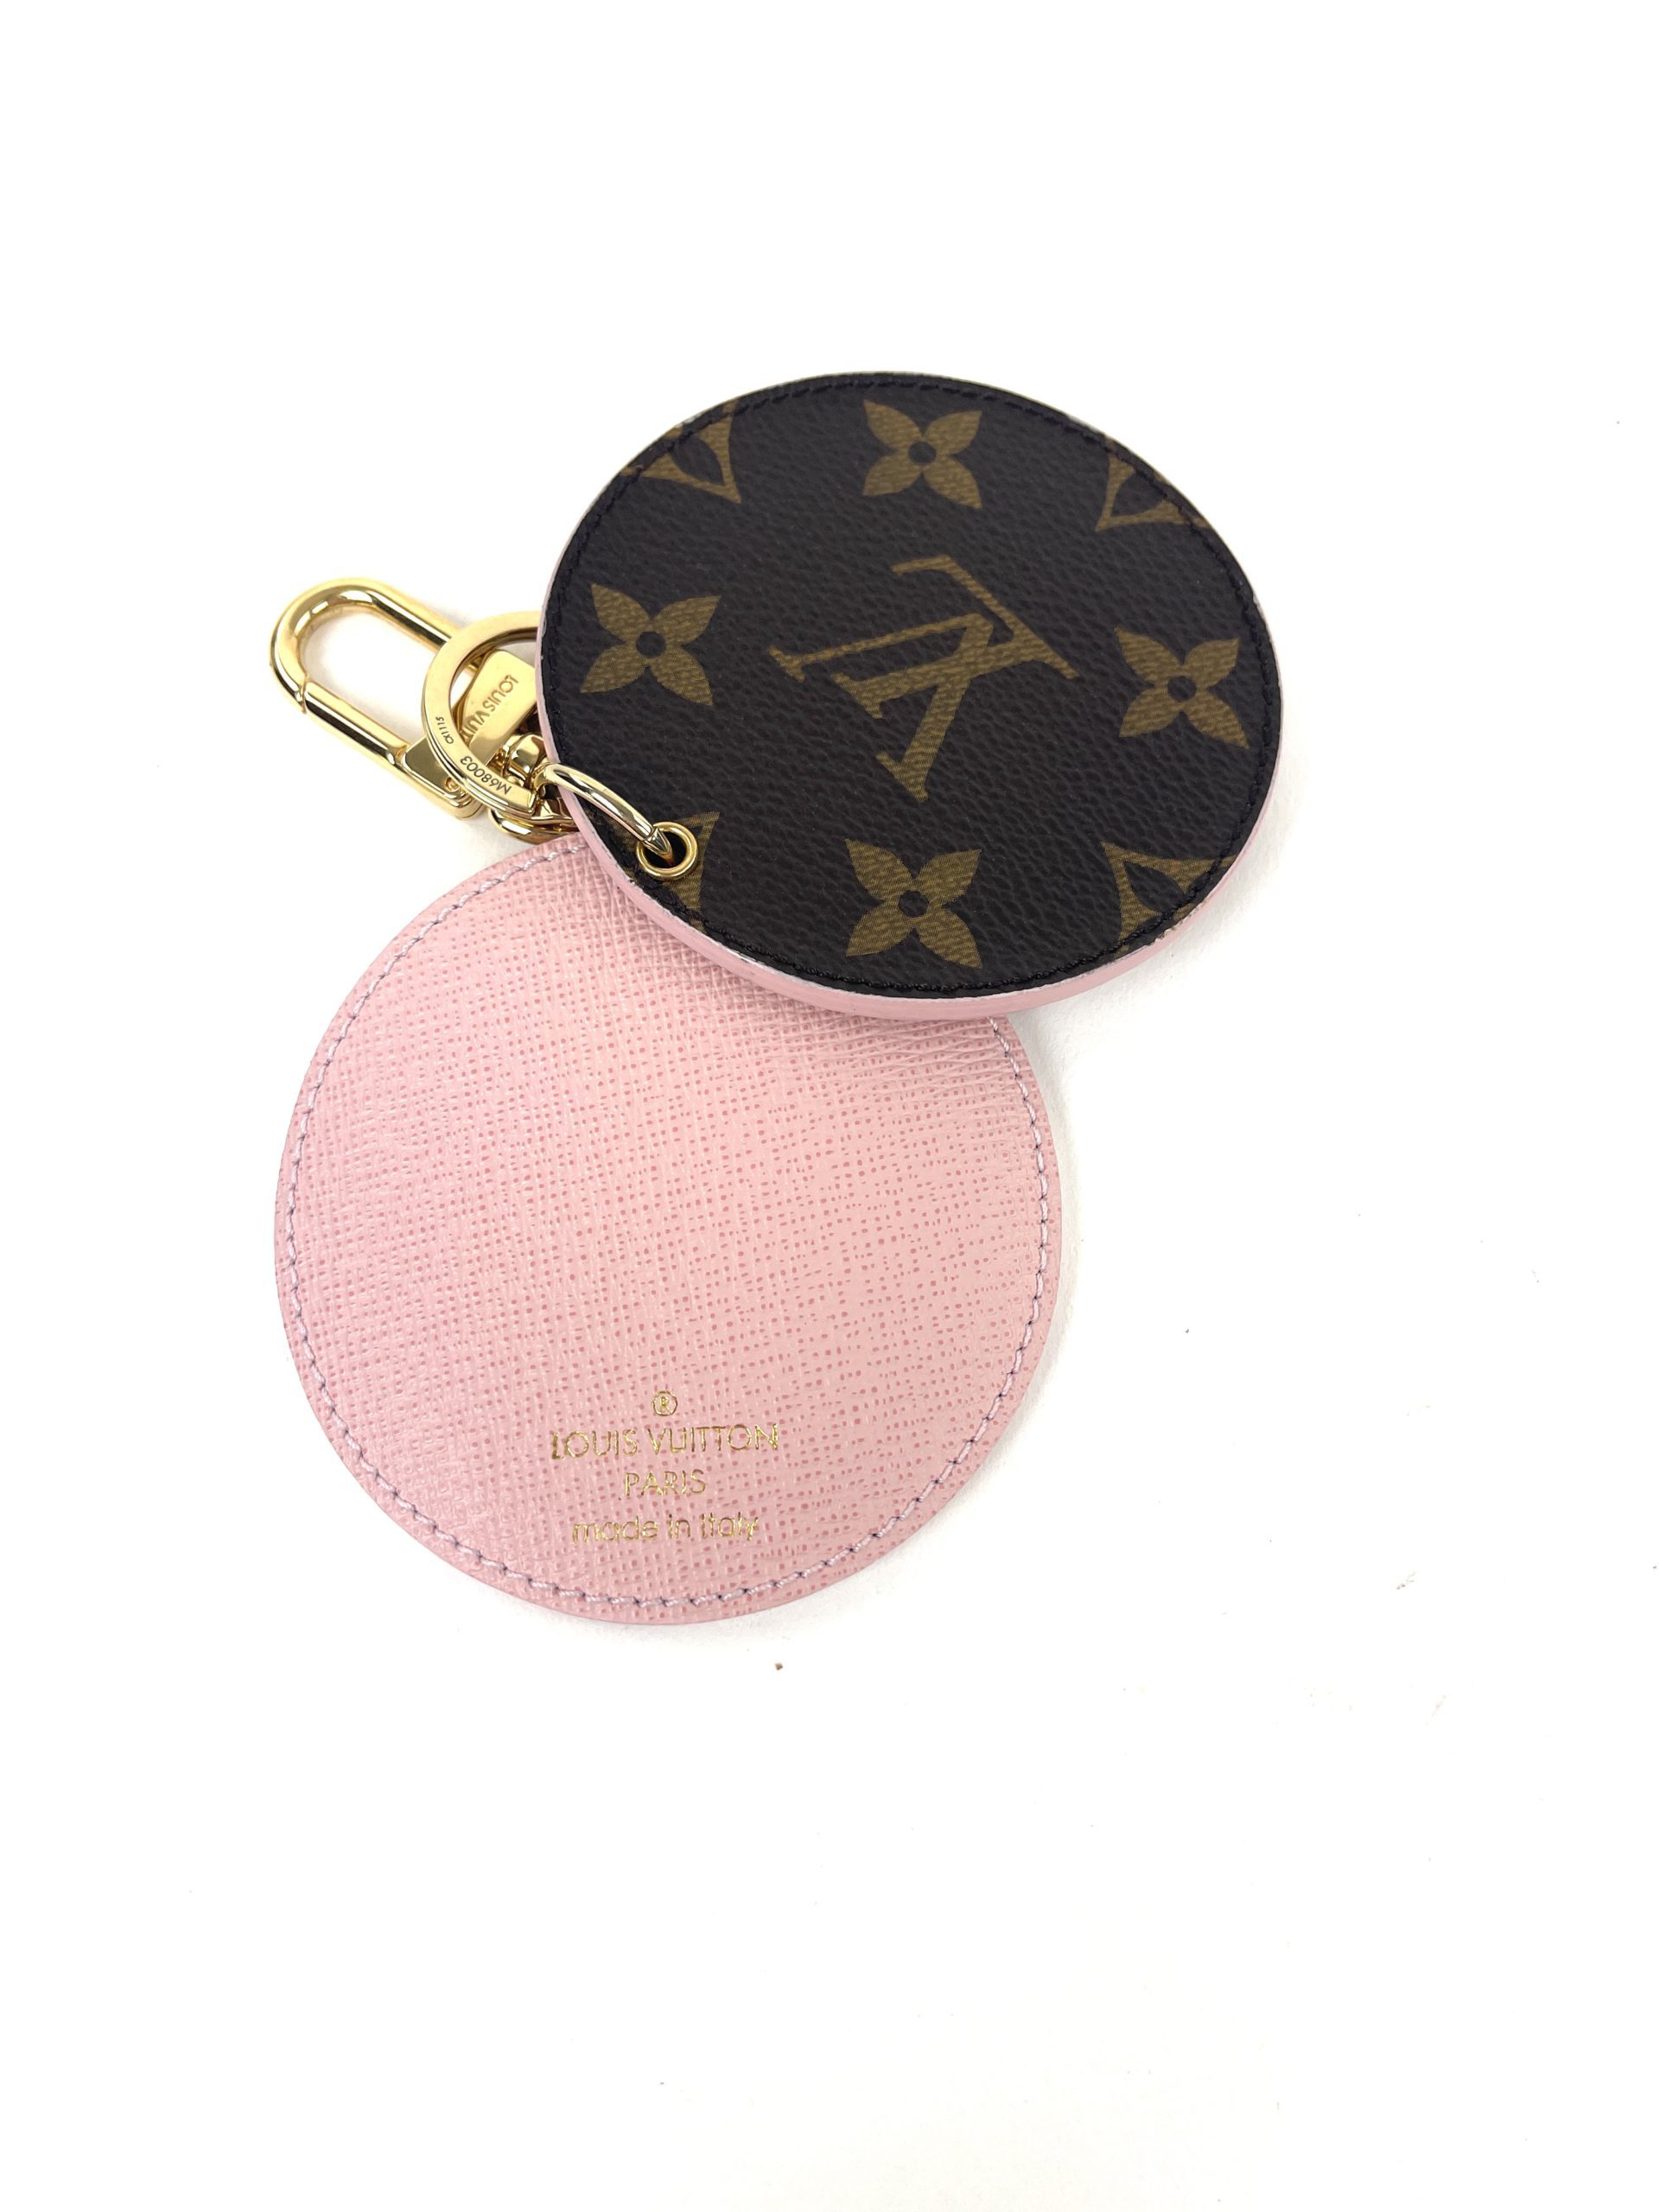 6 key holder in Monogram with the light pink interior Rose Ballerine   Girly car accessories, Cute car accessories, Louis vuitton key holder